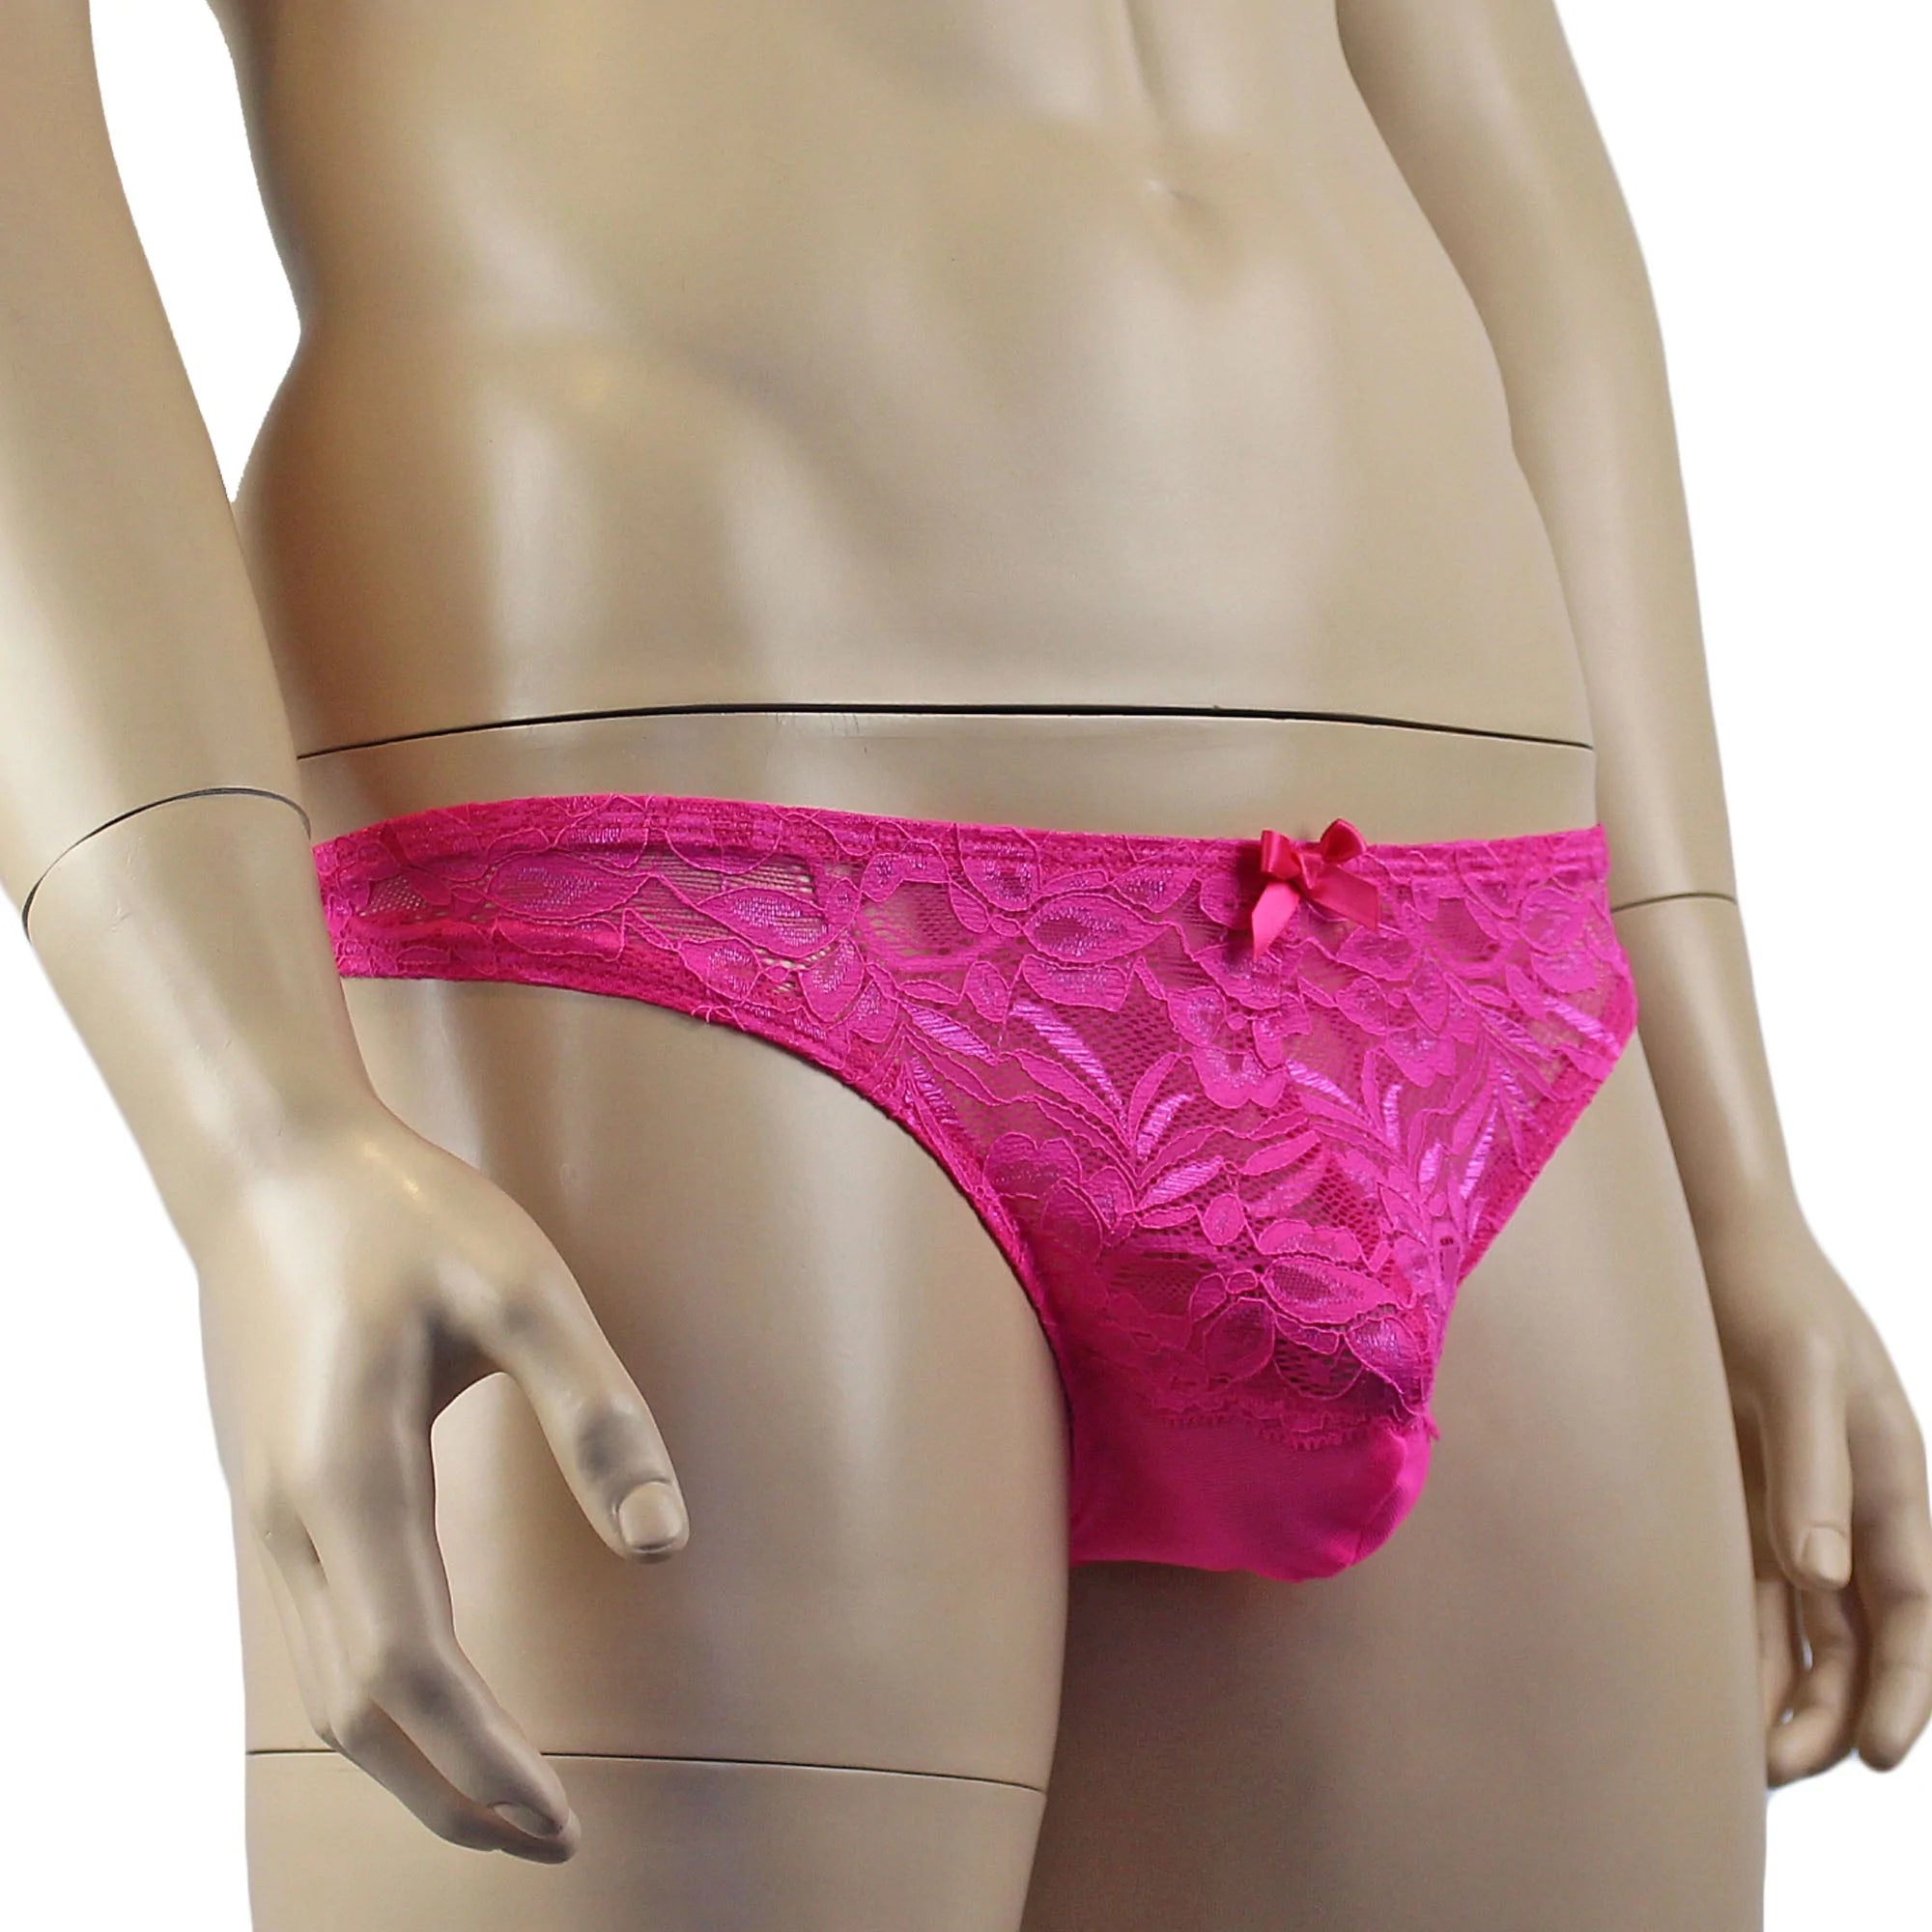 SALE - Mens Kristy Sexy Lace Thong Panties with Stretch Mesh Back Hot Pink